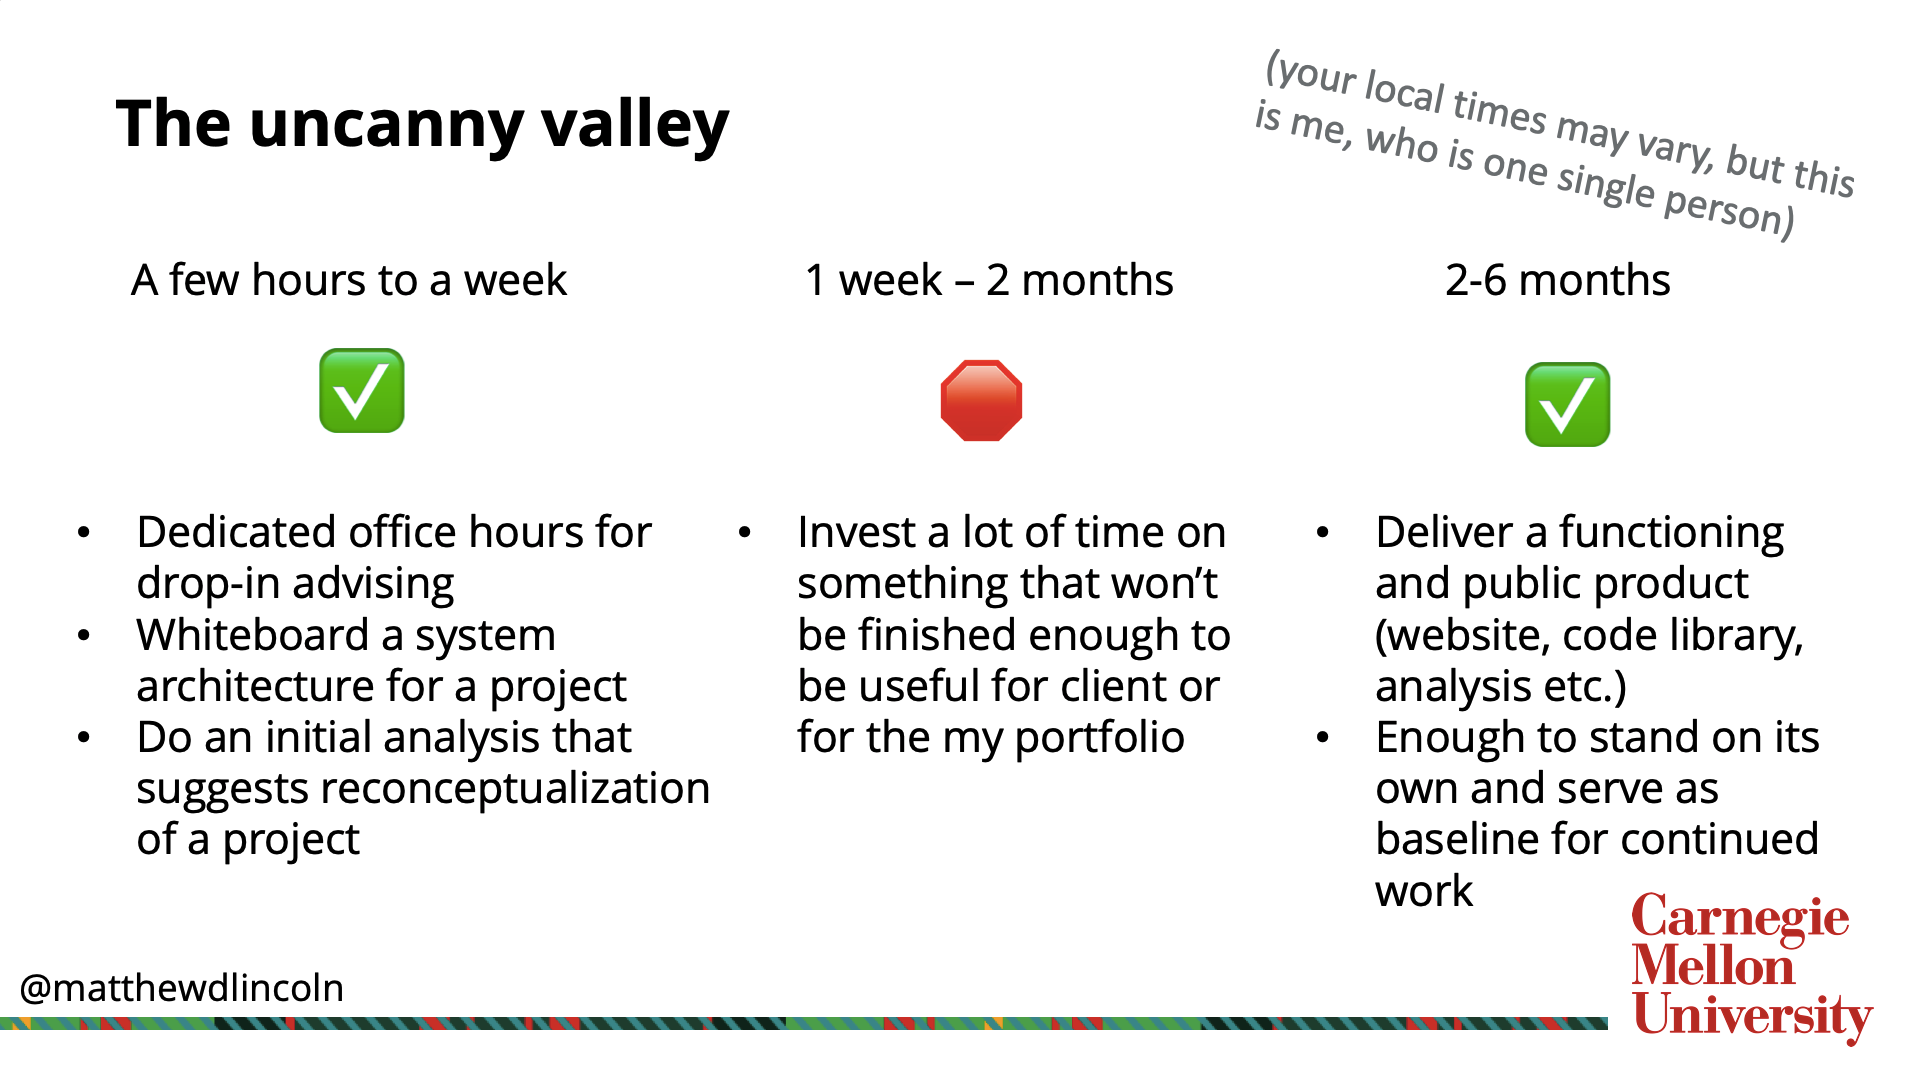 The uncanny valley of DH software work plans